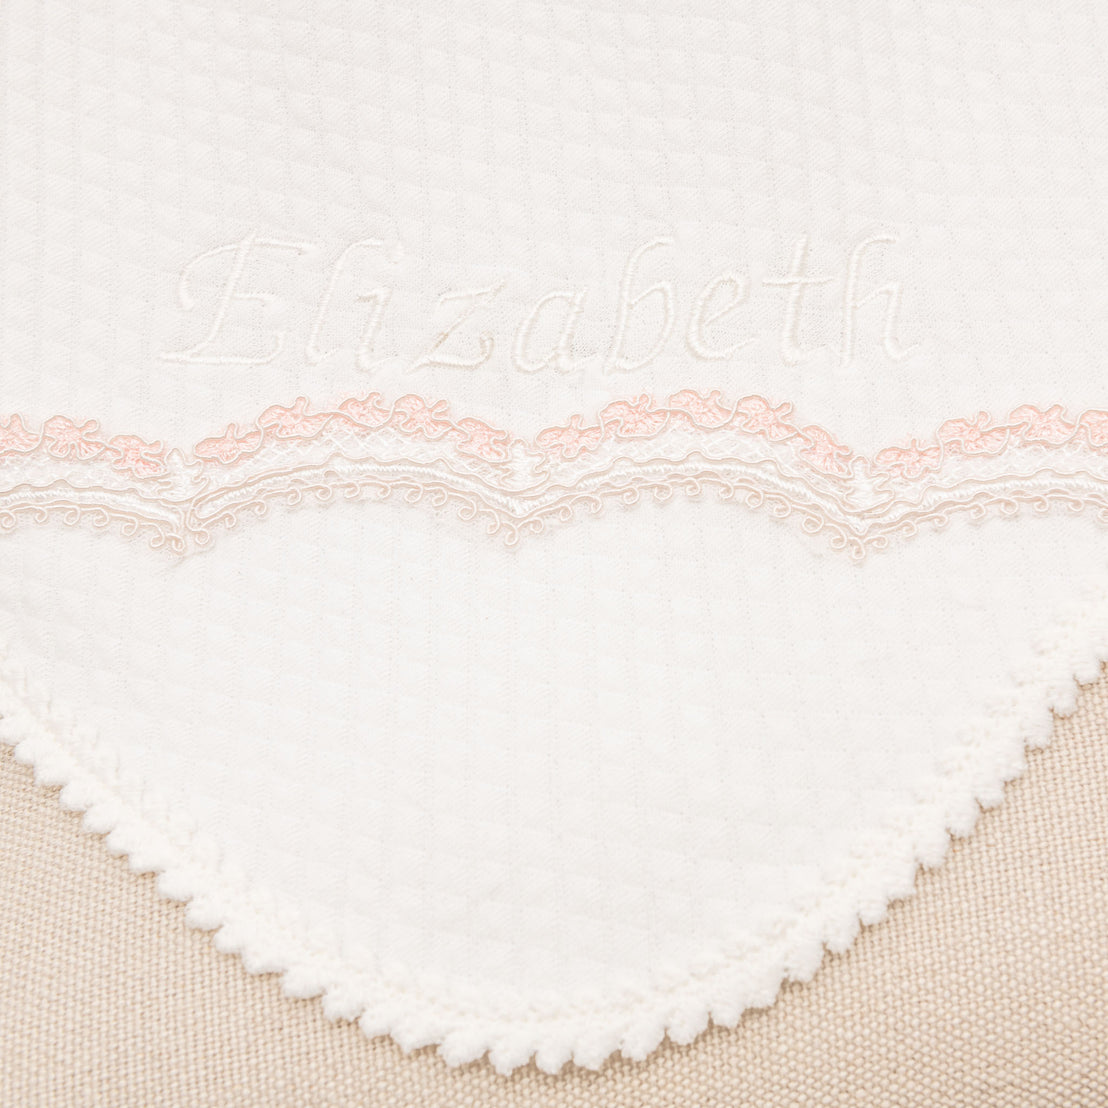 Close-up of a personalized white heirloom Blanket with the embroidered name "Elizabeth" above a heart-shaped lace pattern with pink detailing, ideal for a christening.